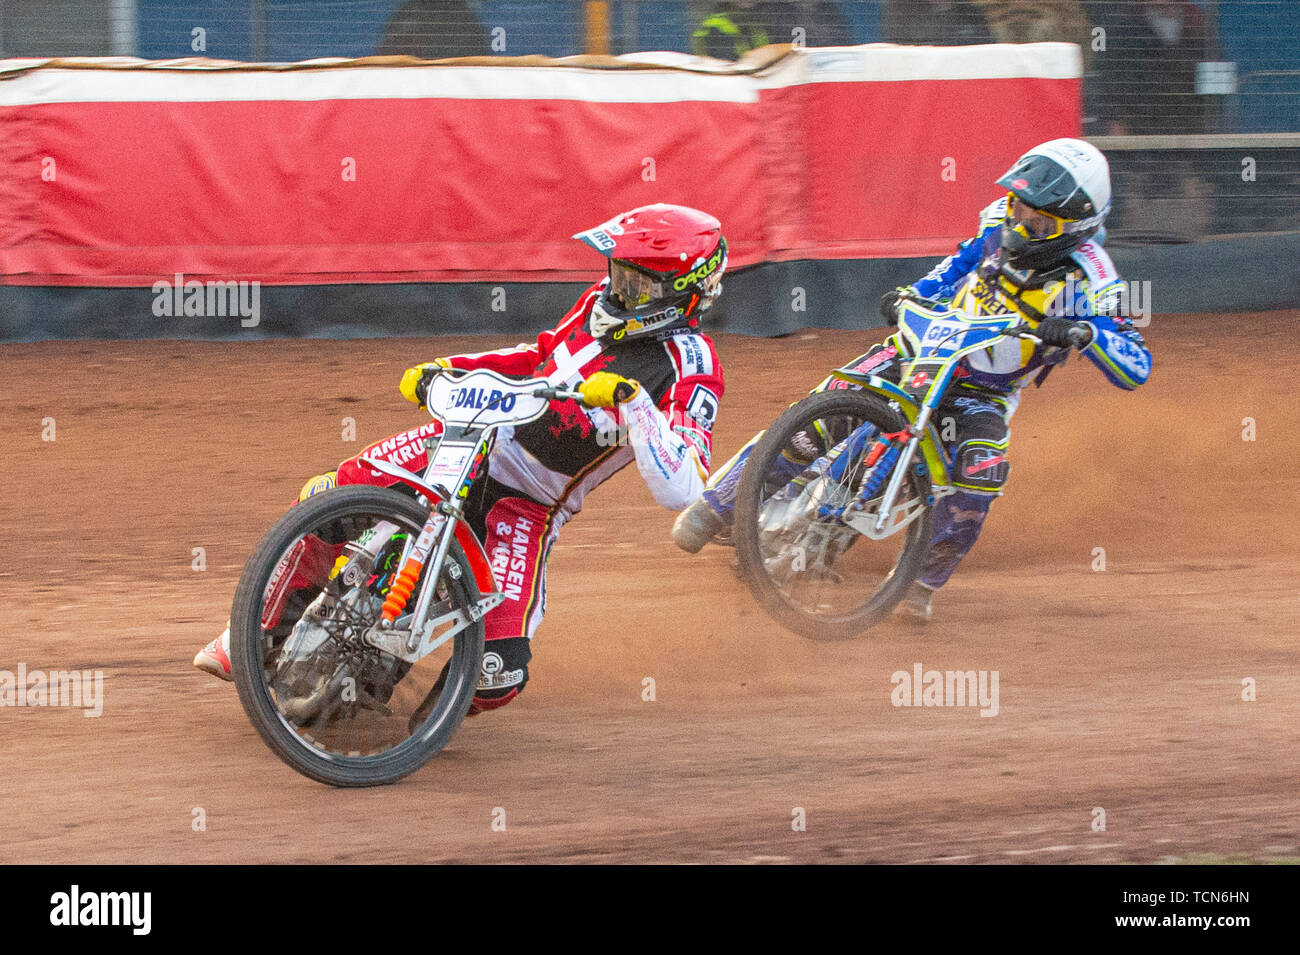 Glasgow, Scotland, UK. 08th June, 2019.  Niels-Kristian Iversen (Red) leads Pontus Aspgren (White) in the run off for 2nd & Third when both riders finished on 13 points during the FIM Speedway Grand Prix World Championship - Qualifying Round 1 at the Peugeot Ashfield Stadium, Glasgow on Saturday 8th June 2019. (Credit: Ian Charles | MI News) Credit: MI News & Sport /Alamy Live News Stock Photo